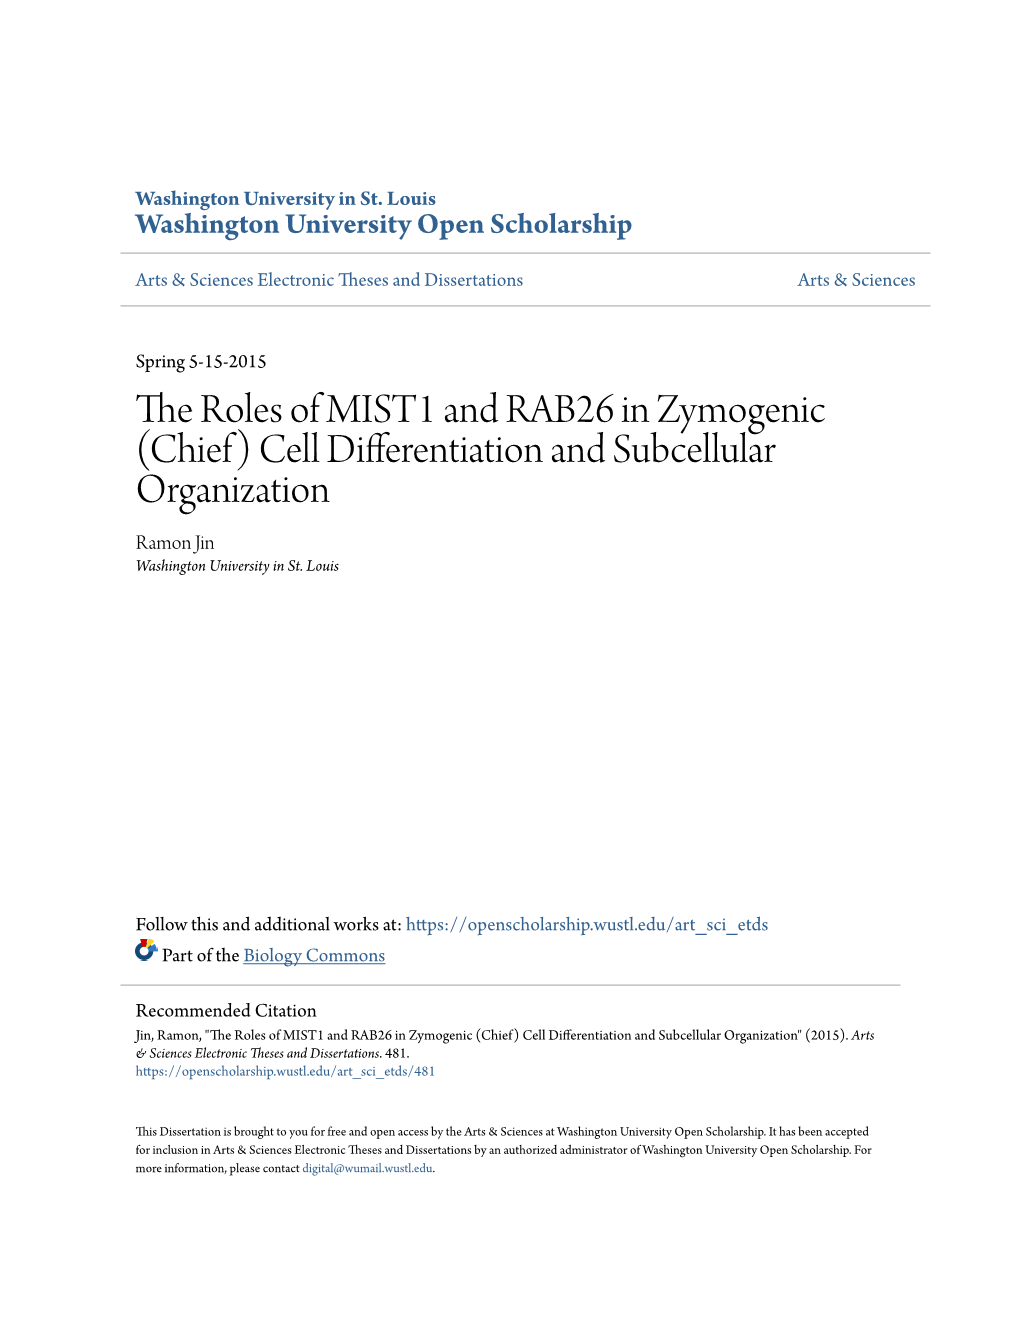 The Roles of MIST1 and RAB26 in Zymogenic (Chief) Cell Differentiation and Subcellular Organization" (2015)